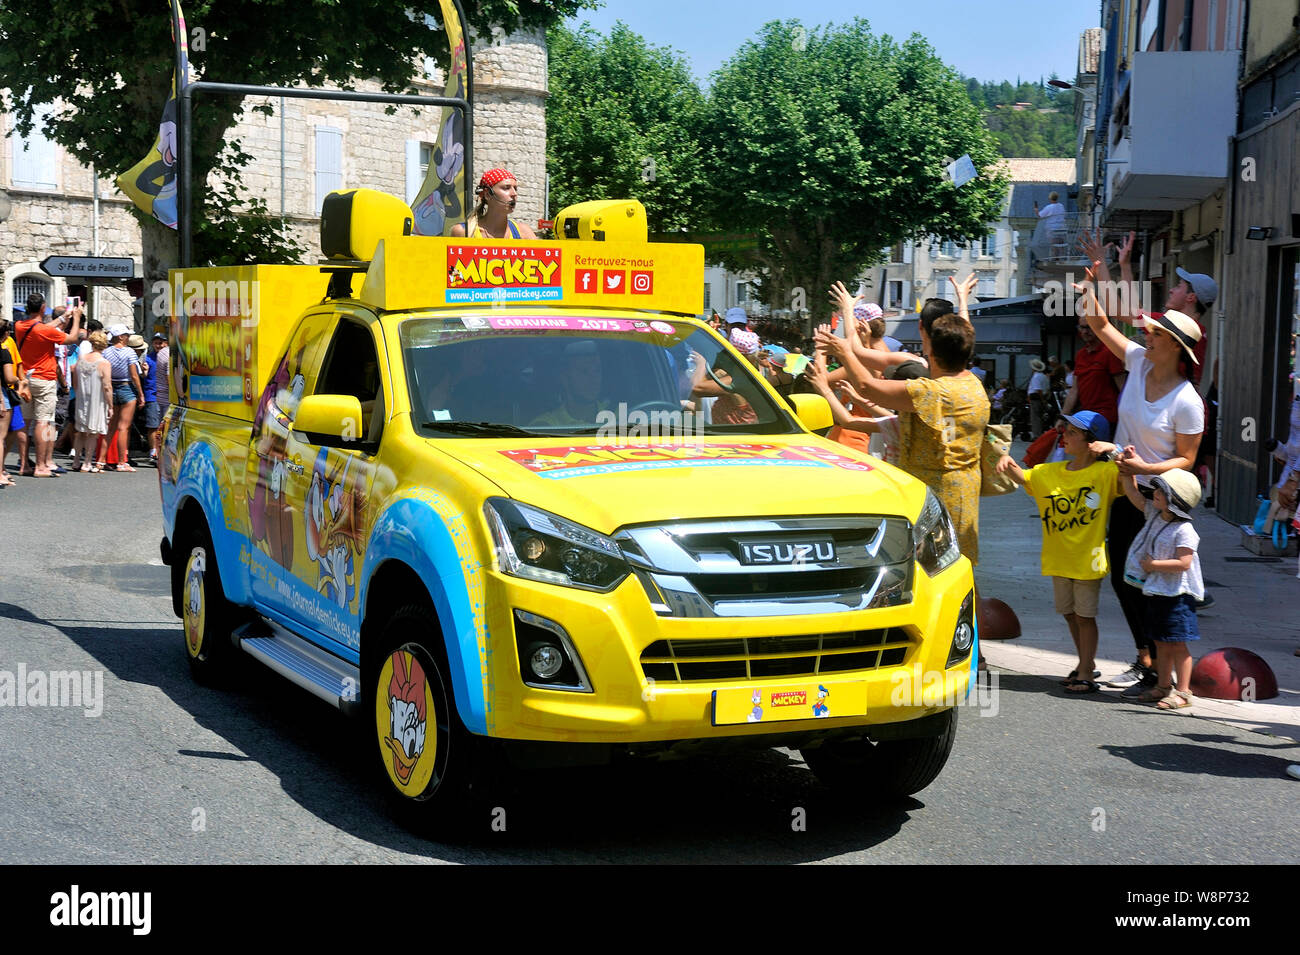 Passage of a car from Mickey's newspaper in the Tour de France caravan in Anduze Stock Photo